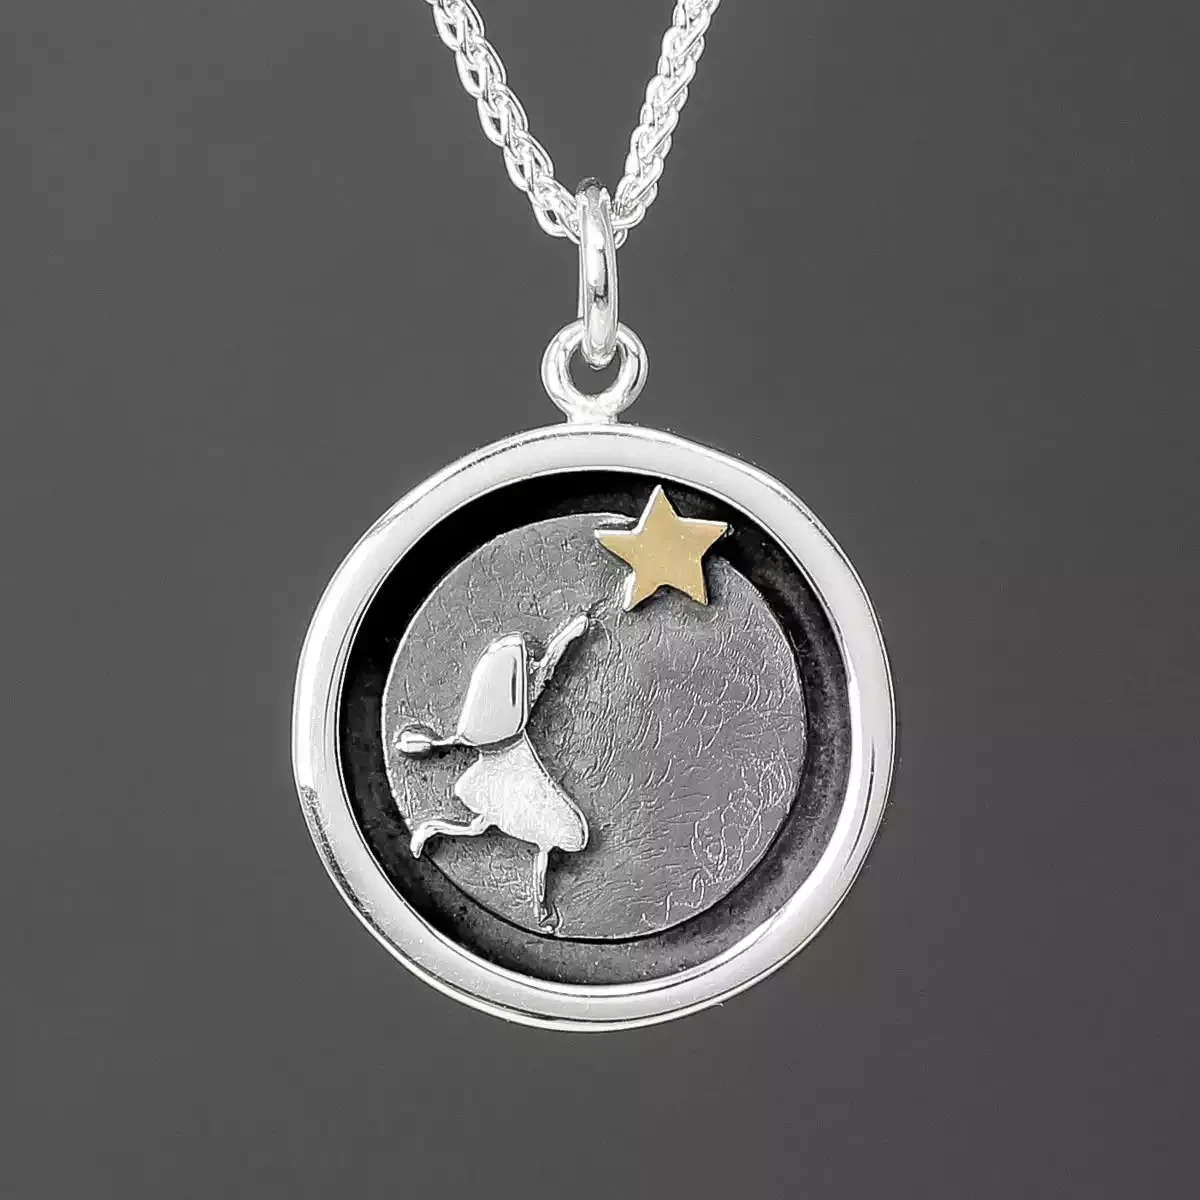 Reach for the Stars Disc Silver and Gold Pendant by Linda Macdonald